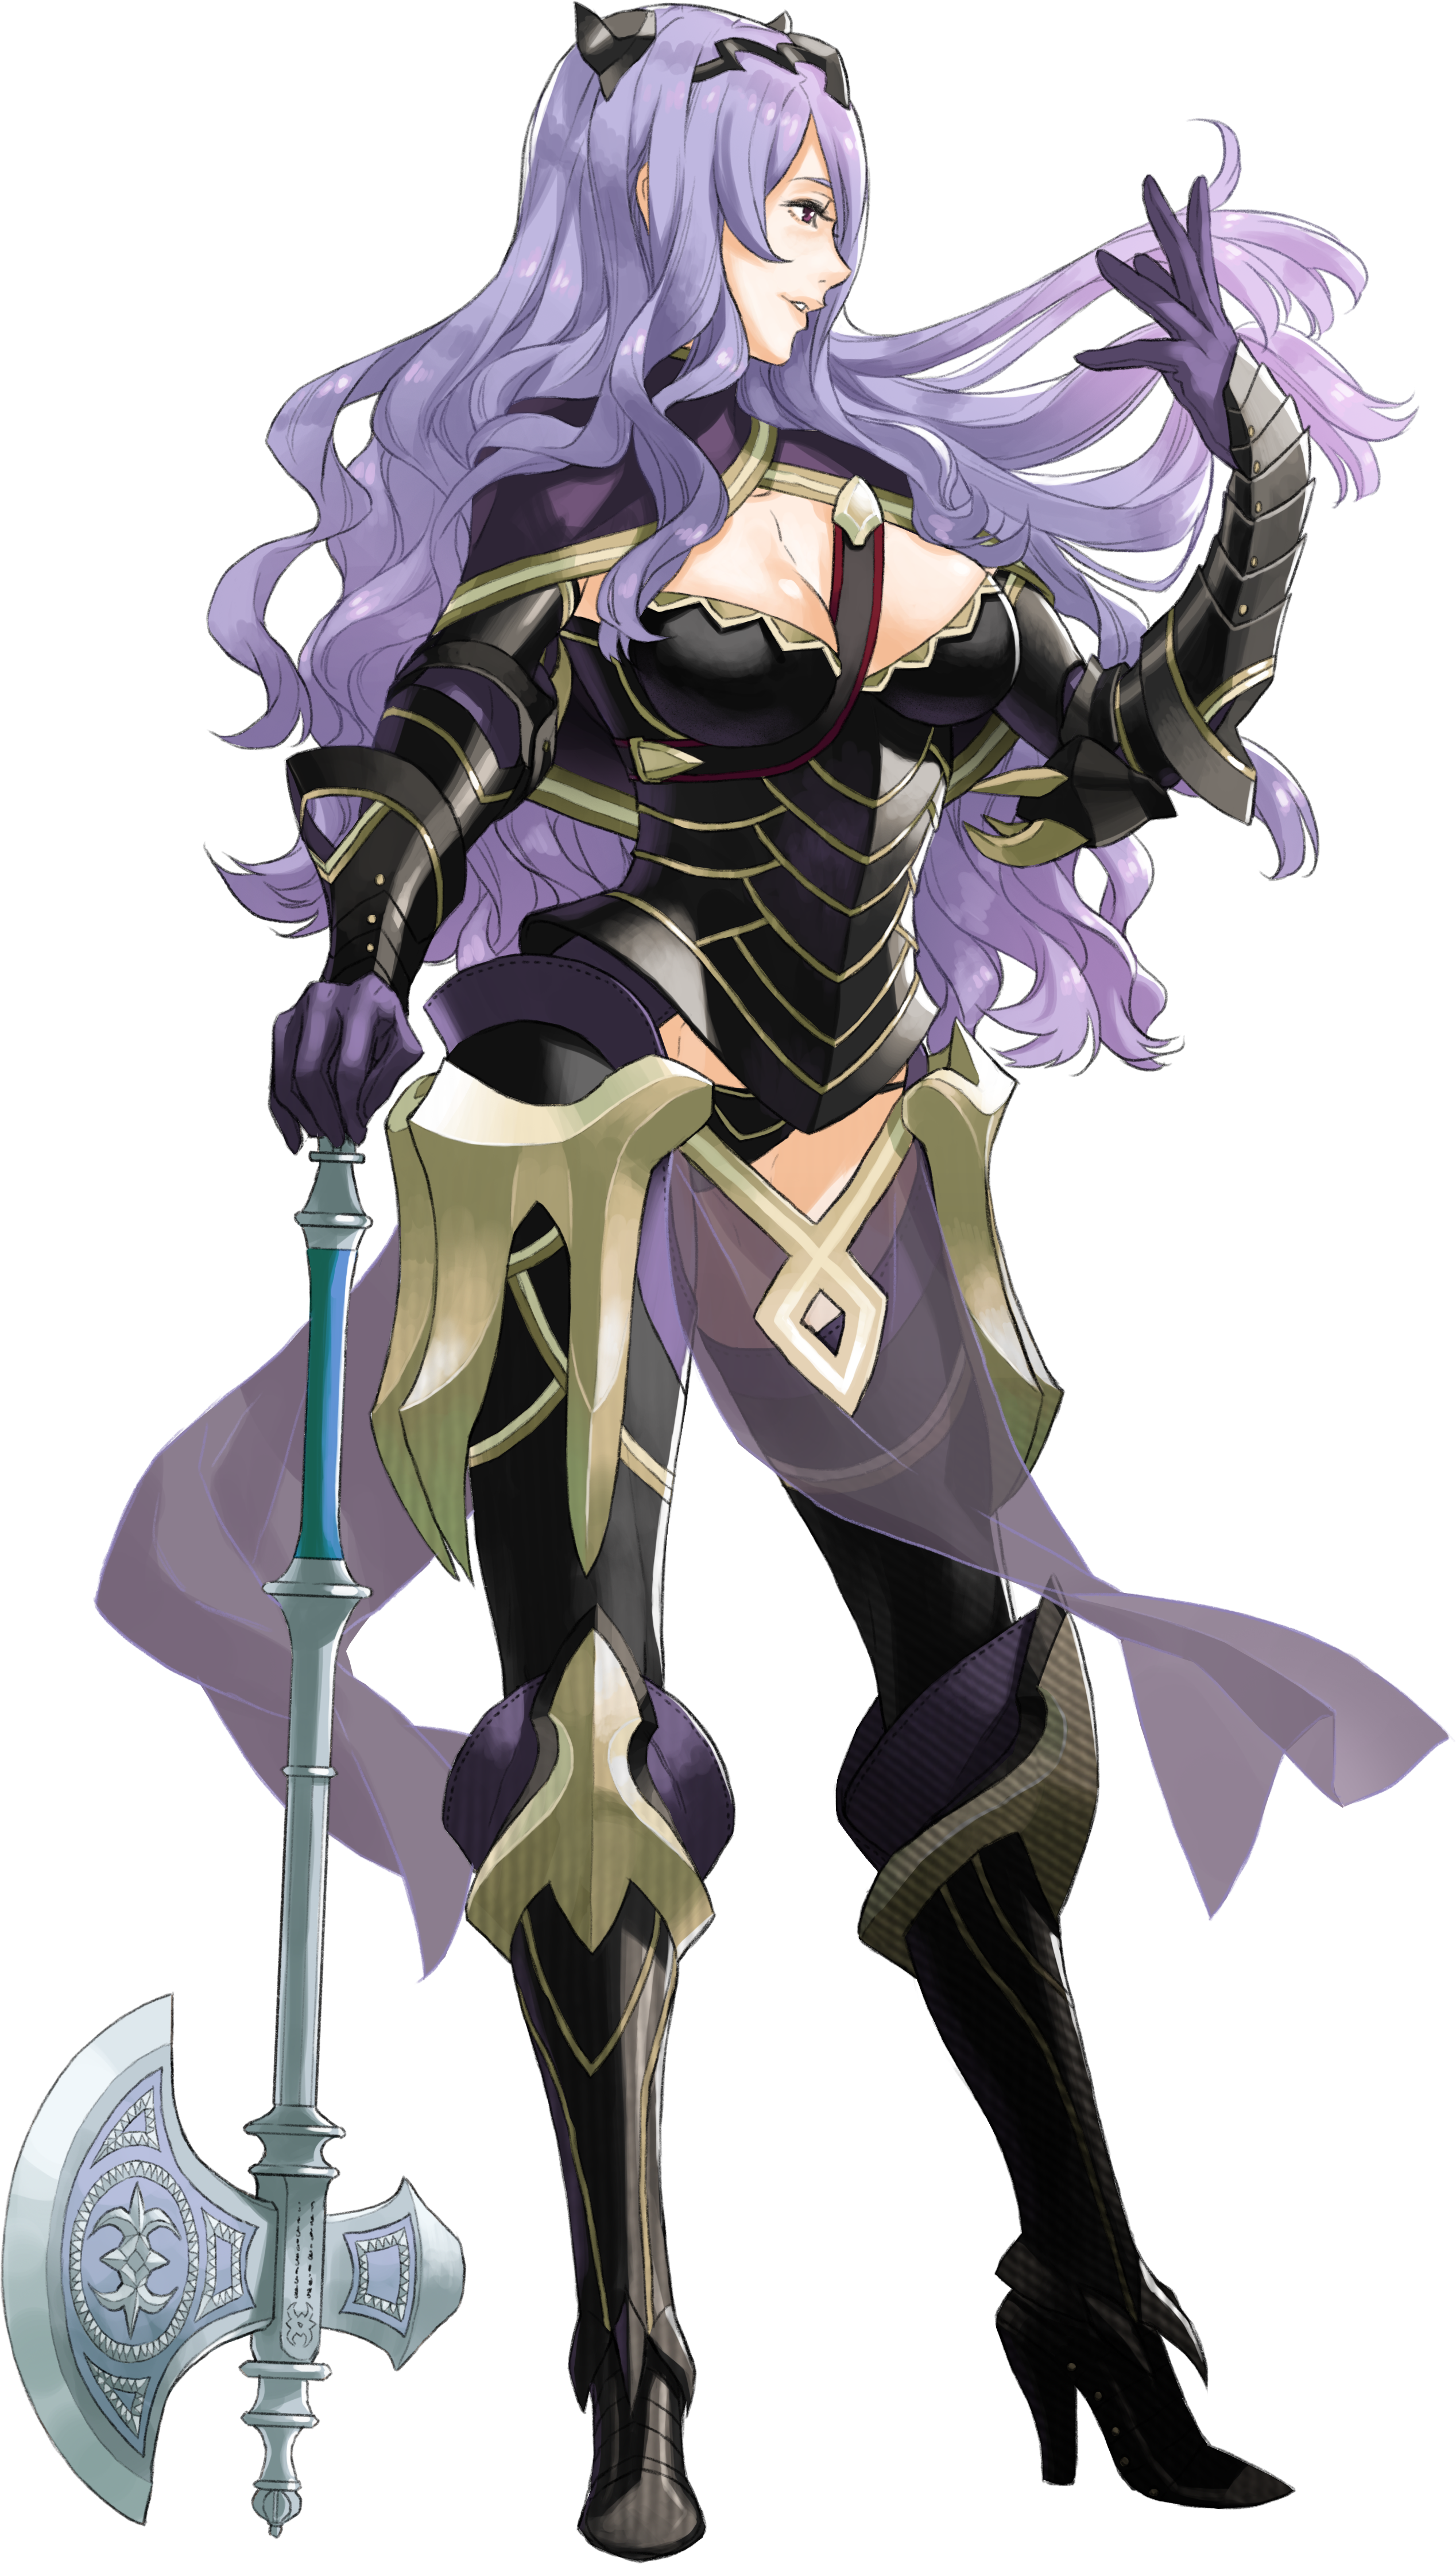 Fire Emblem Heroes Adds More Swimsuit Costumes, Fire Emblem Echoes  Characters - News - Anime News Network